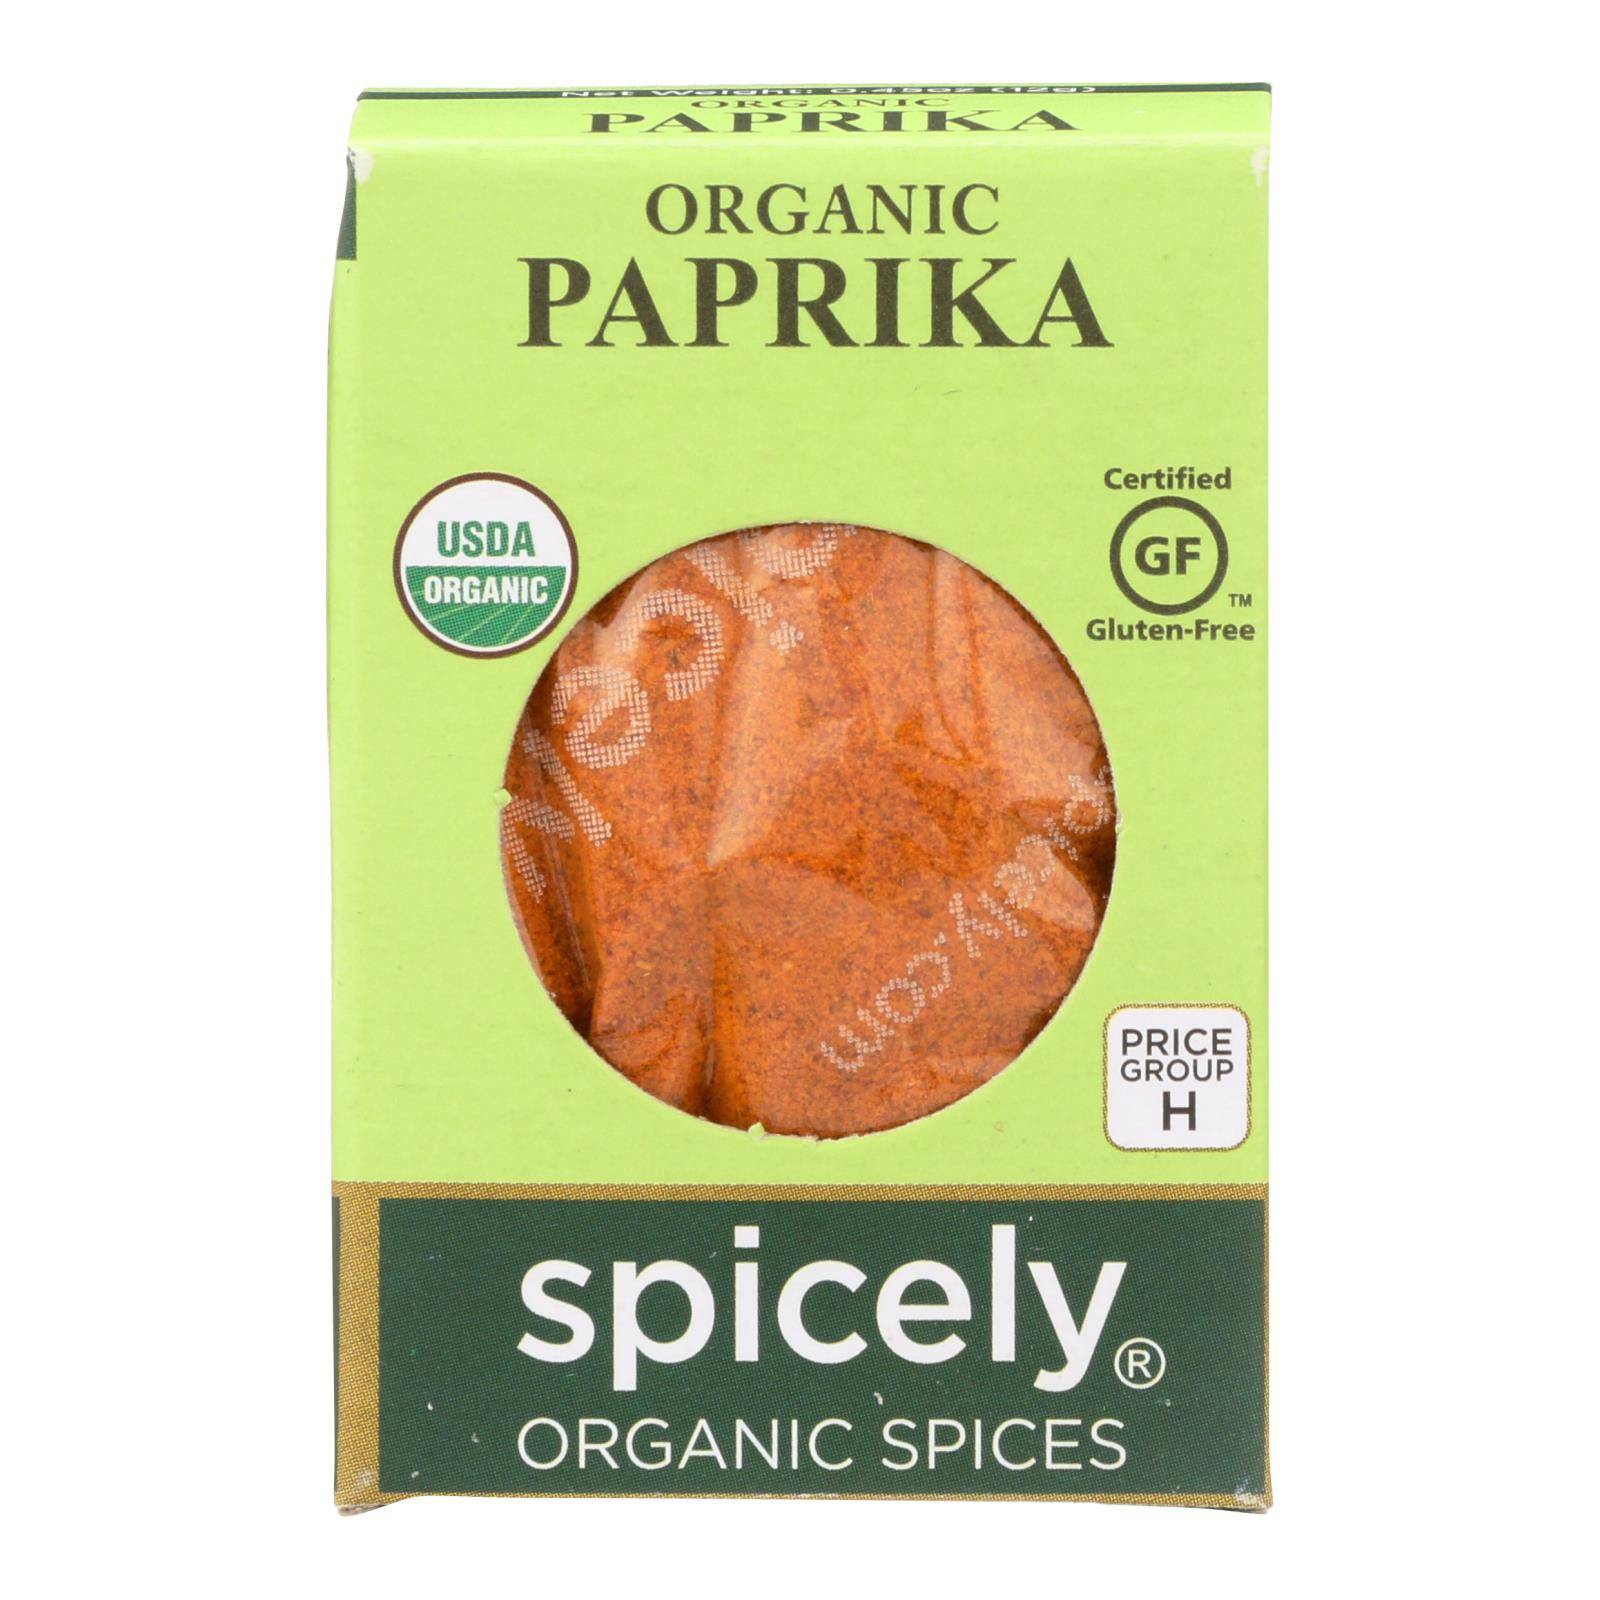 Buy Spicely Organics - Organic Paprika - Case Of 6 - 0.45 Oz.  at OnlyNaturals.us